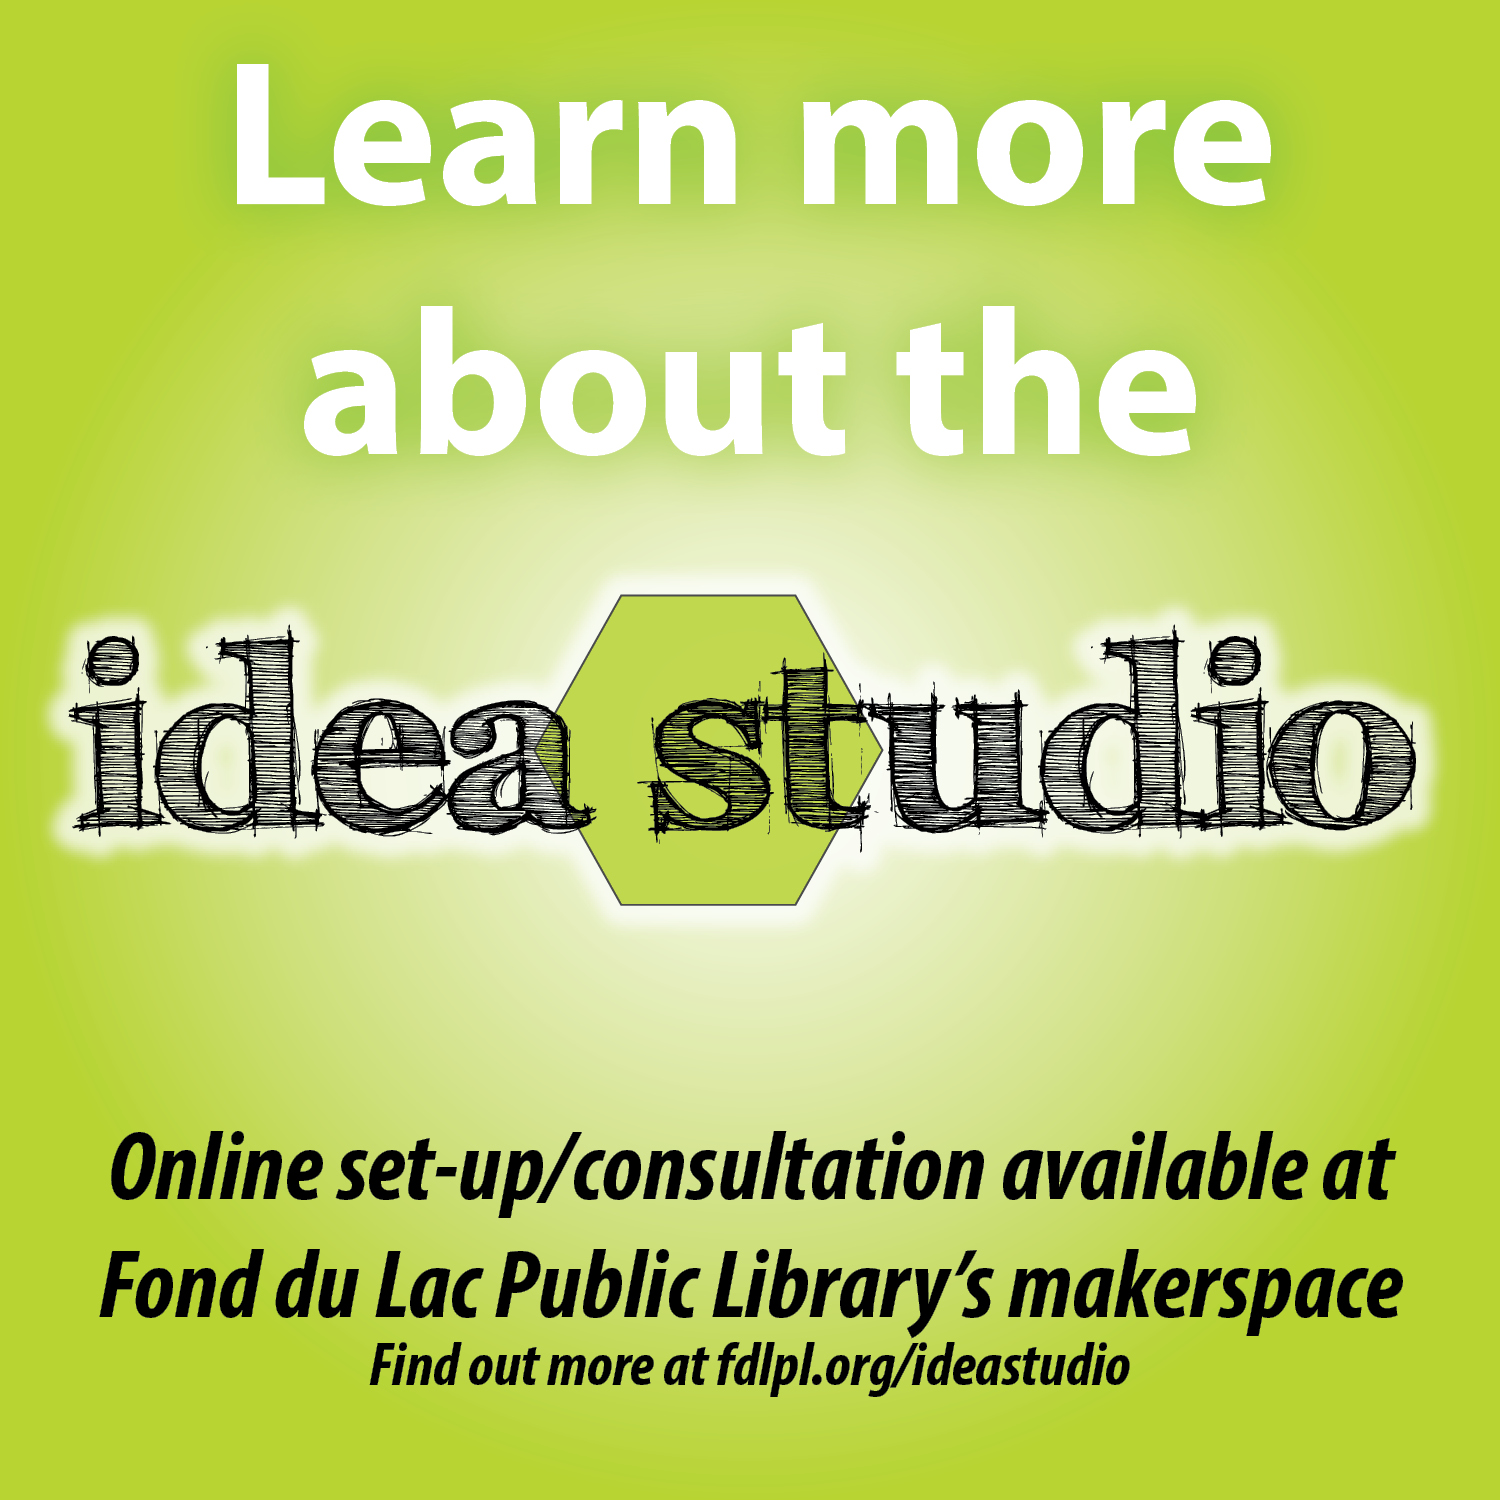 White text on a green background reads, "Learn more about the idea studio," the Fond du Lac Public Library's makerspace. Online setup and consultation are available.